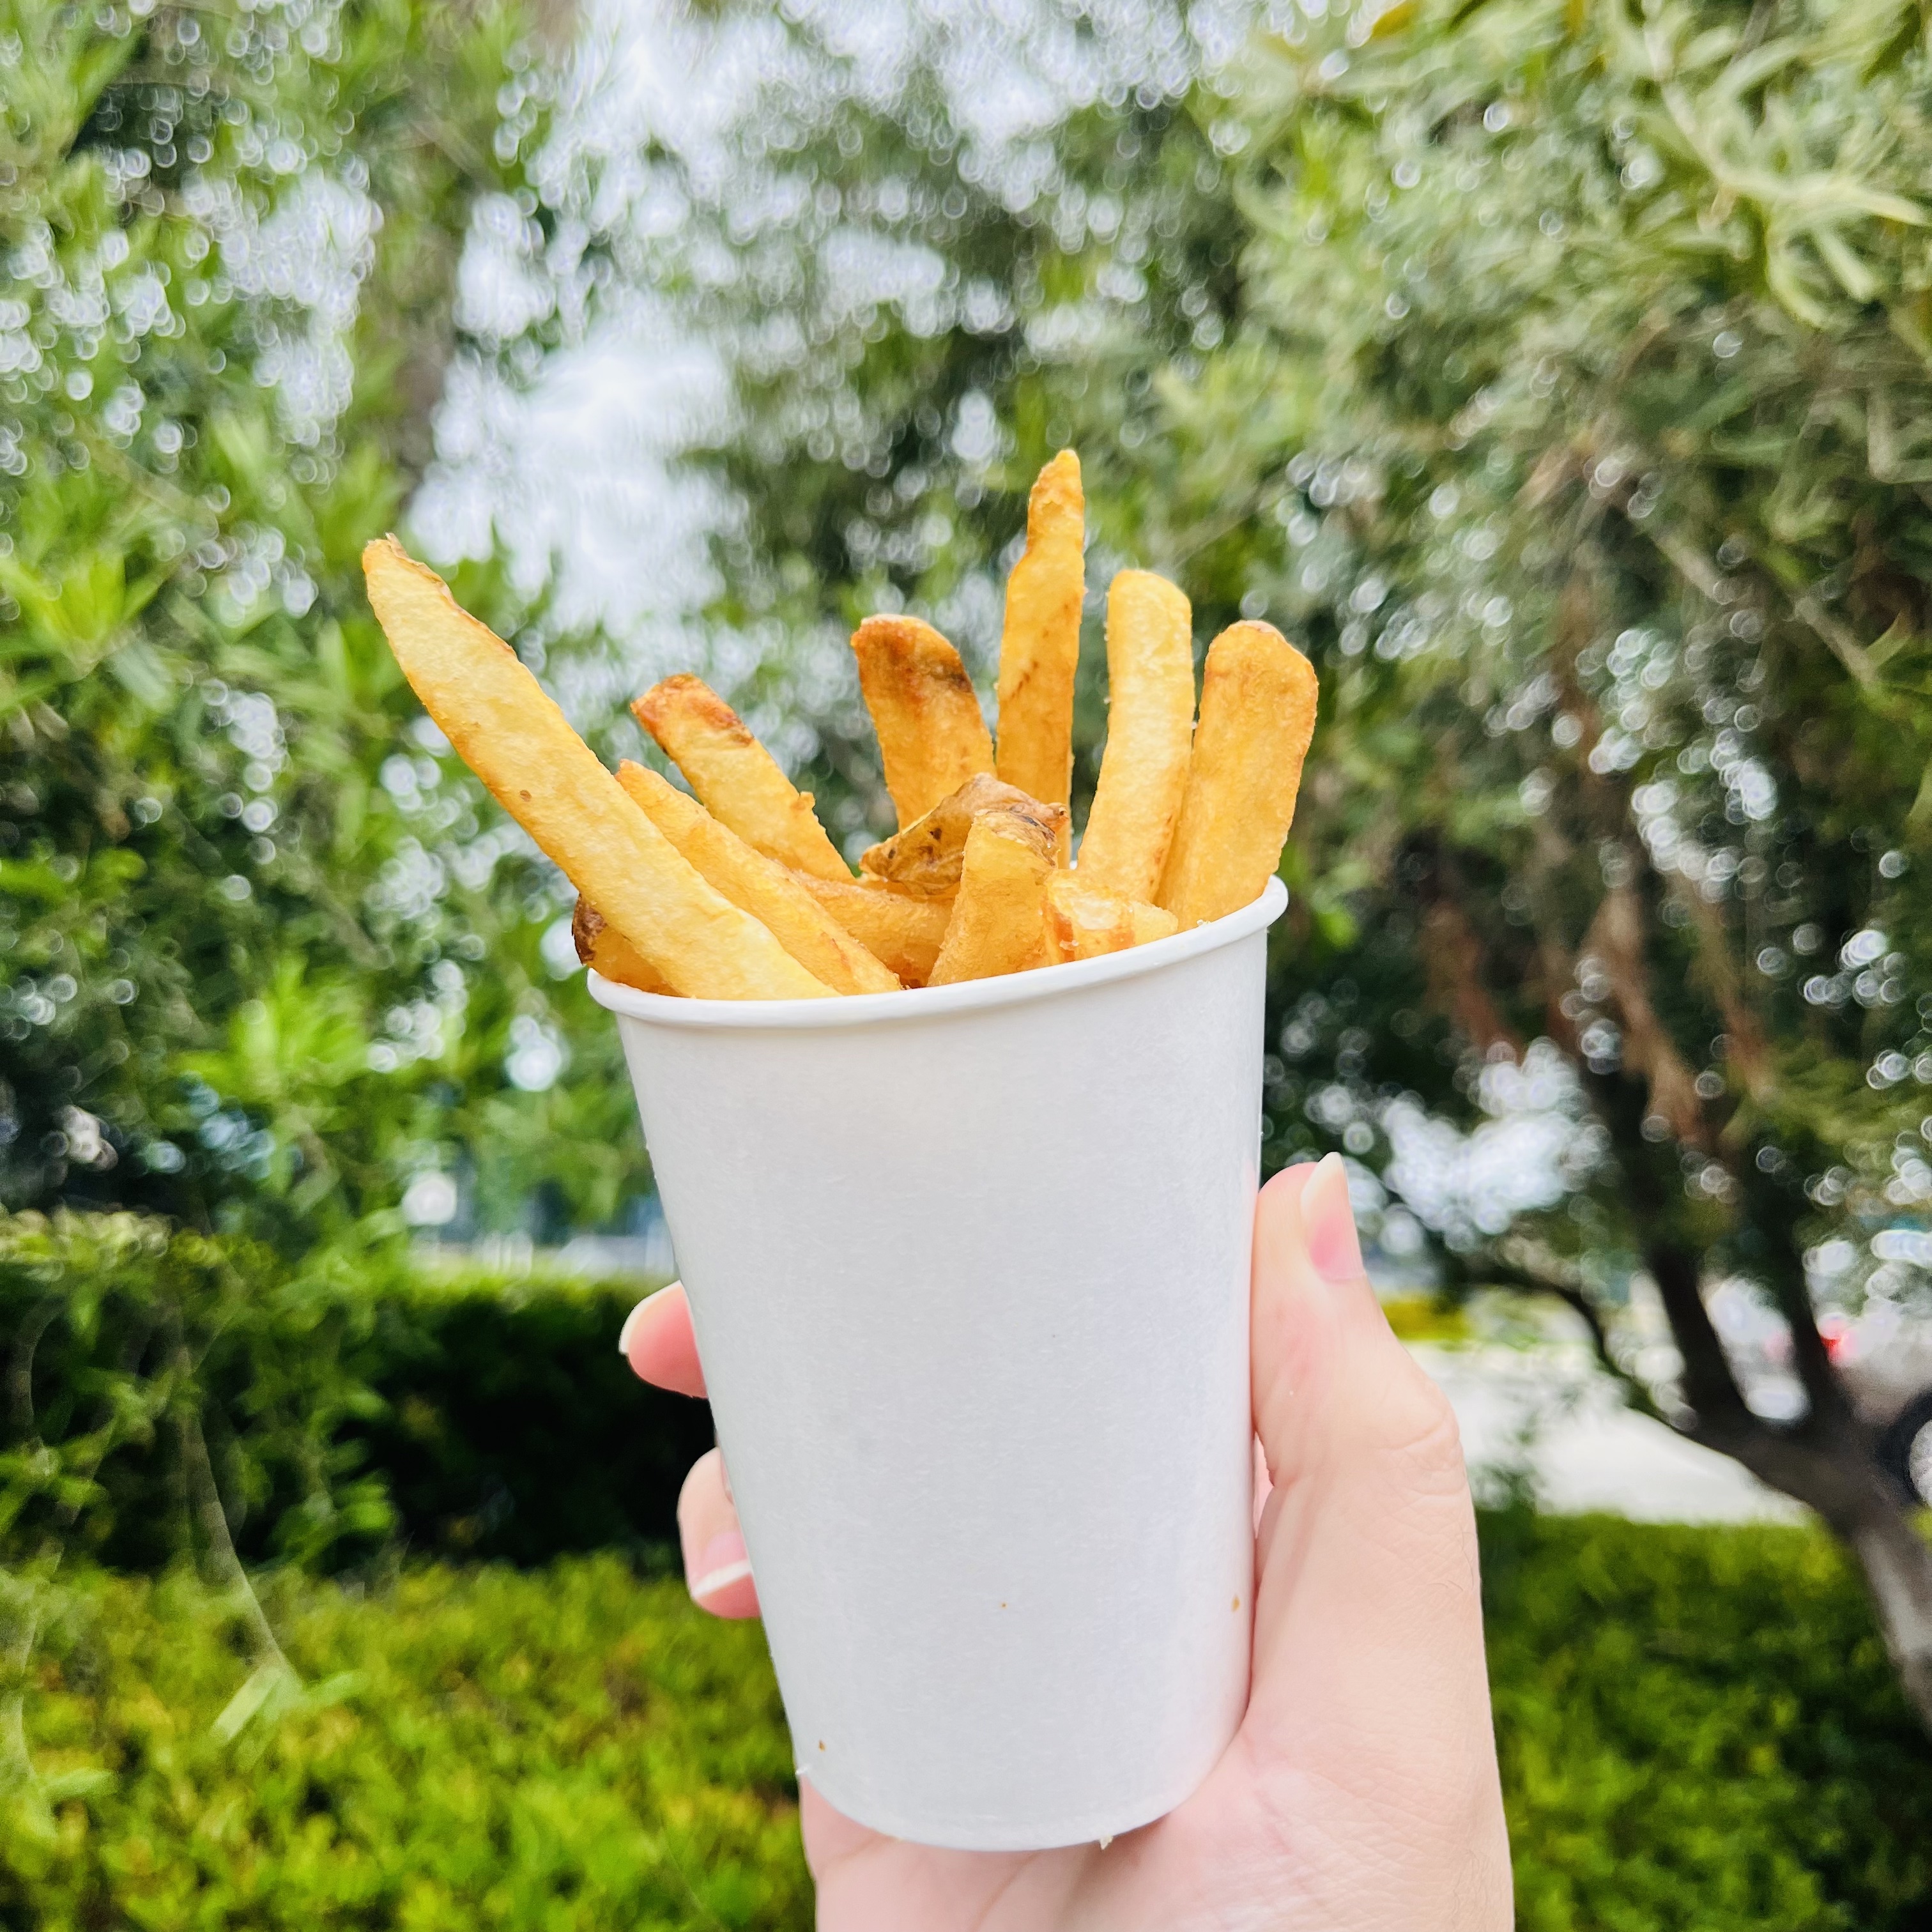 Fast Food French Fries